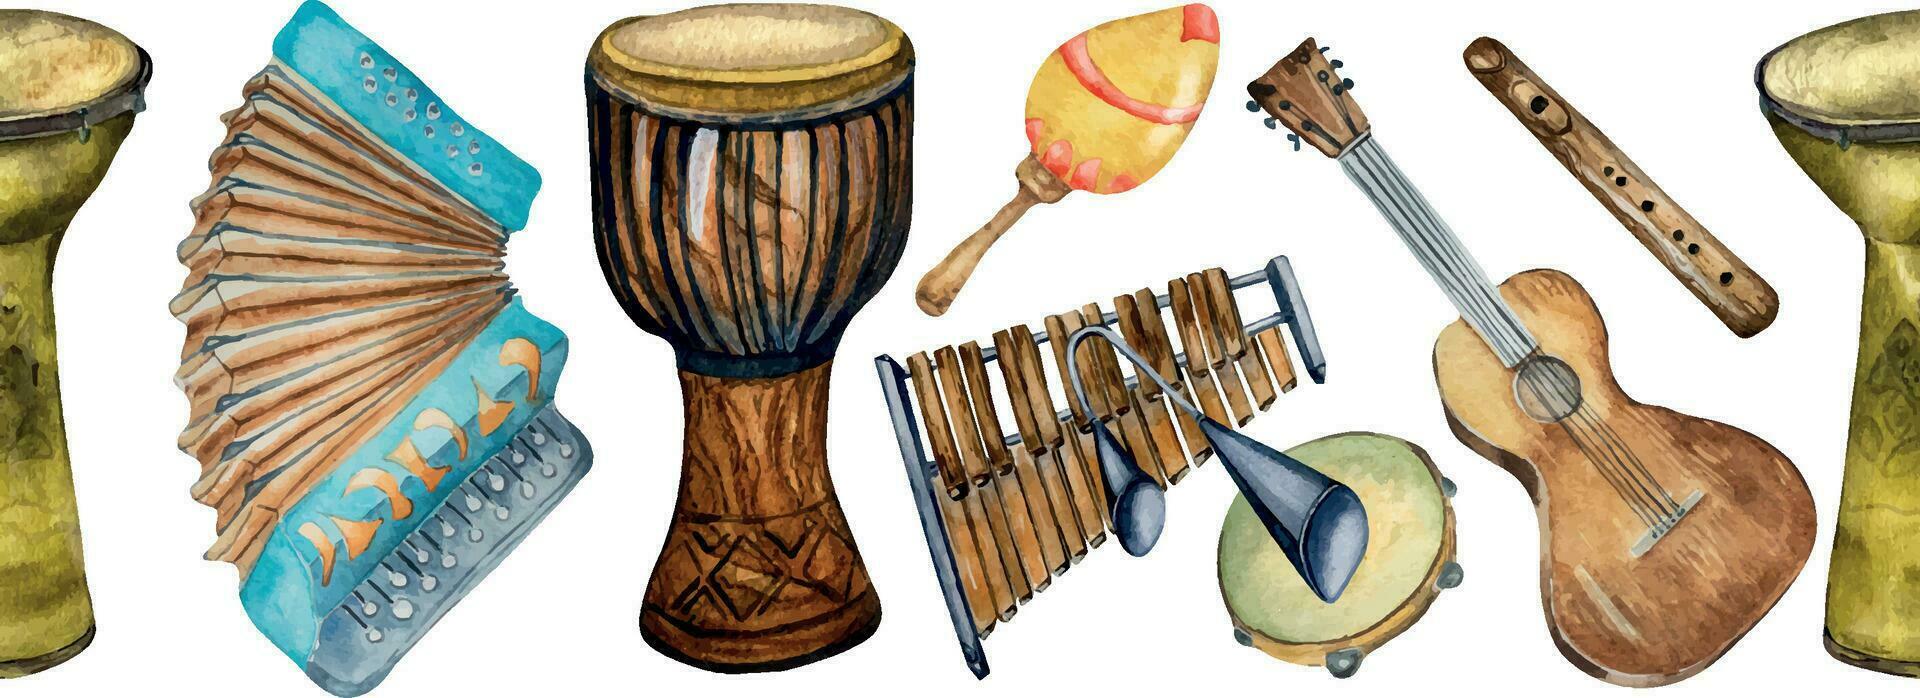 Watercolor drawn musical instruments isolated on white background. Seamless border for a music project. Hand drawn accordion, guitar, drums, and banjo. Xylophone painted. Design element for print vector